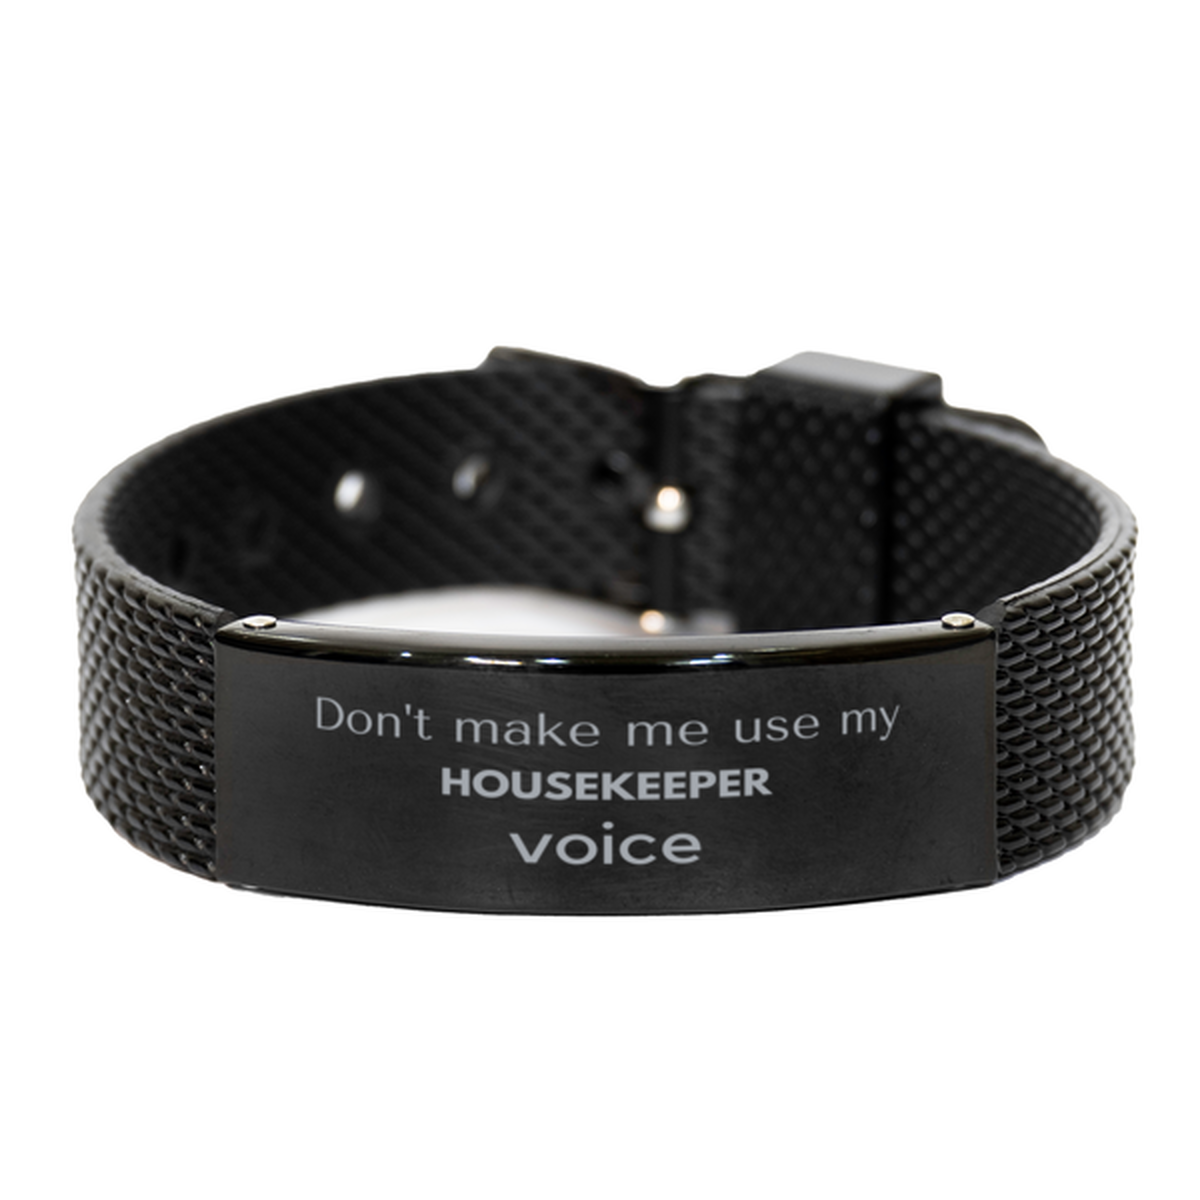 Don't make me use my Housekeeper voice, Sarcasm Housekeeper Gifts, Christmas Housekeeper Black Shark Mesh Bracelet Birthday Unique Gifts For Housekeeper Coworkers, Men, Women, Colleague, Friends